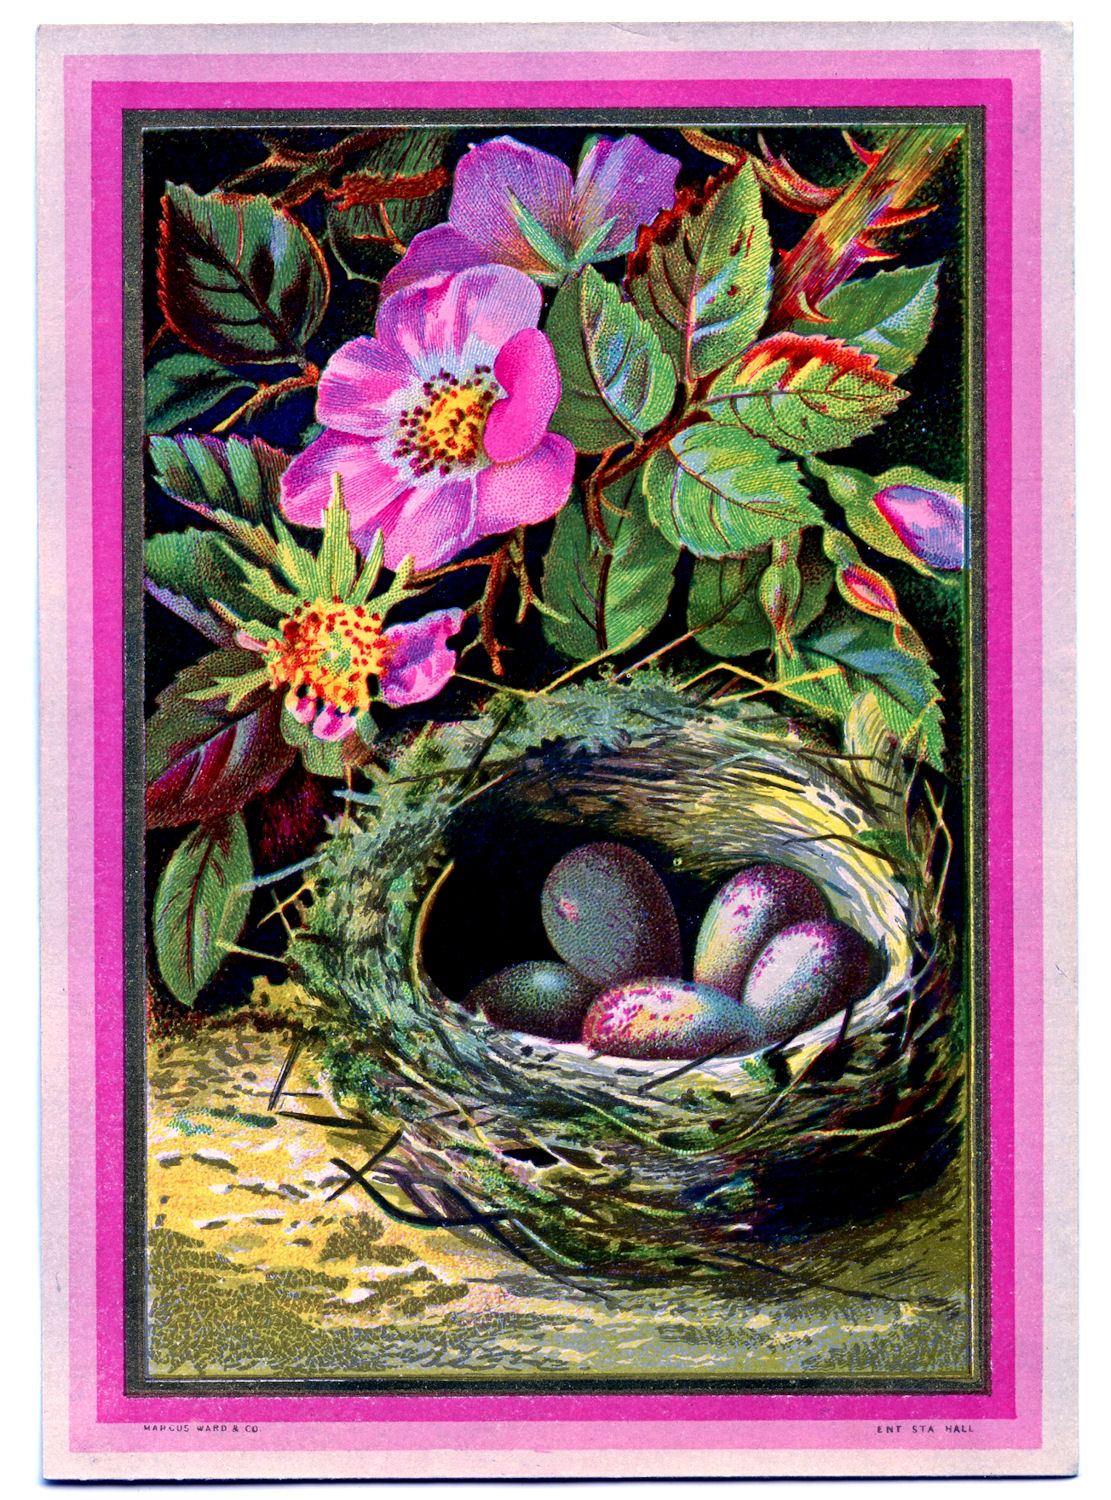 Vintage Clip Art - Nest with Eggs and Pink Roses - The Graphics Fairy